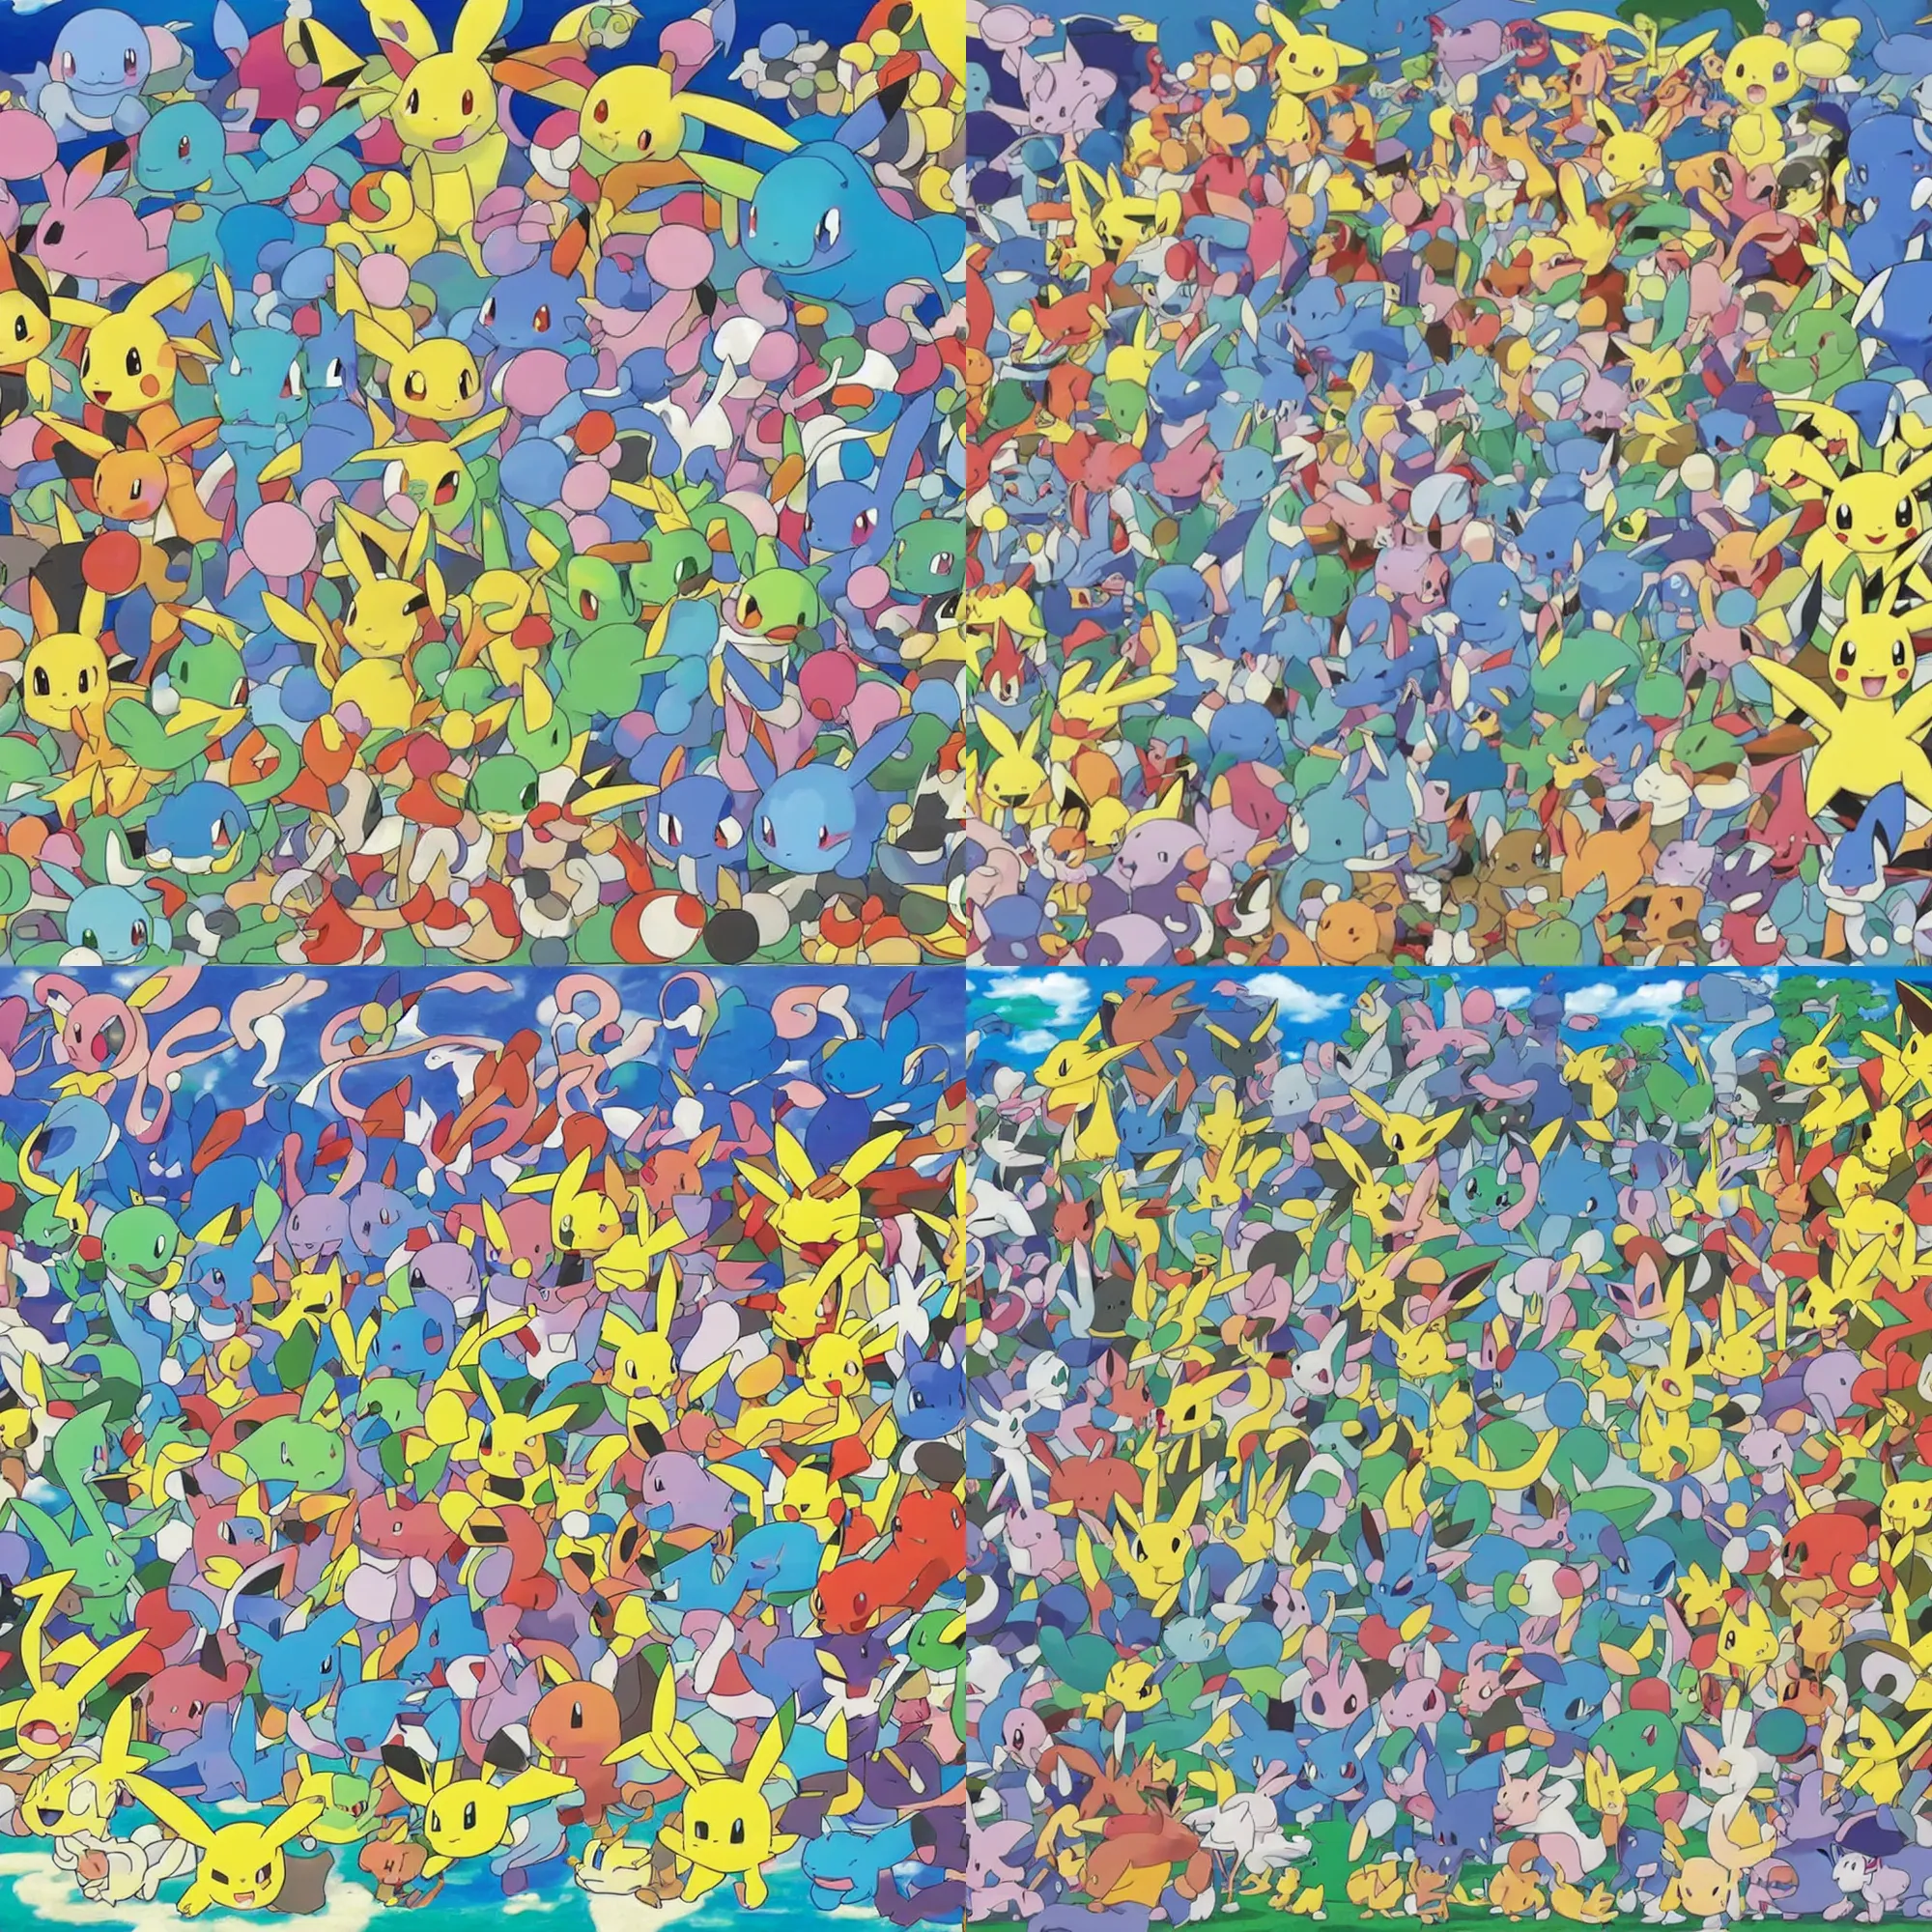 Prompt: official art of a diverse, rainbow-colored crowd of Pokemon, by Ken Sugimori, Bulbapedia :: lapras::1 mewtwo::1 tangela::1 flareon::1 pikachu::0